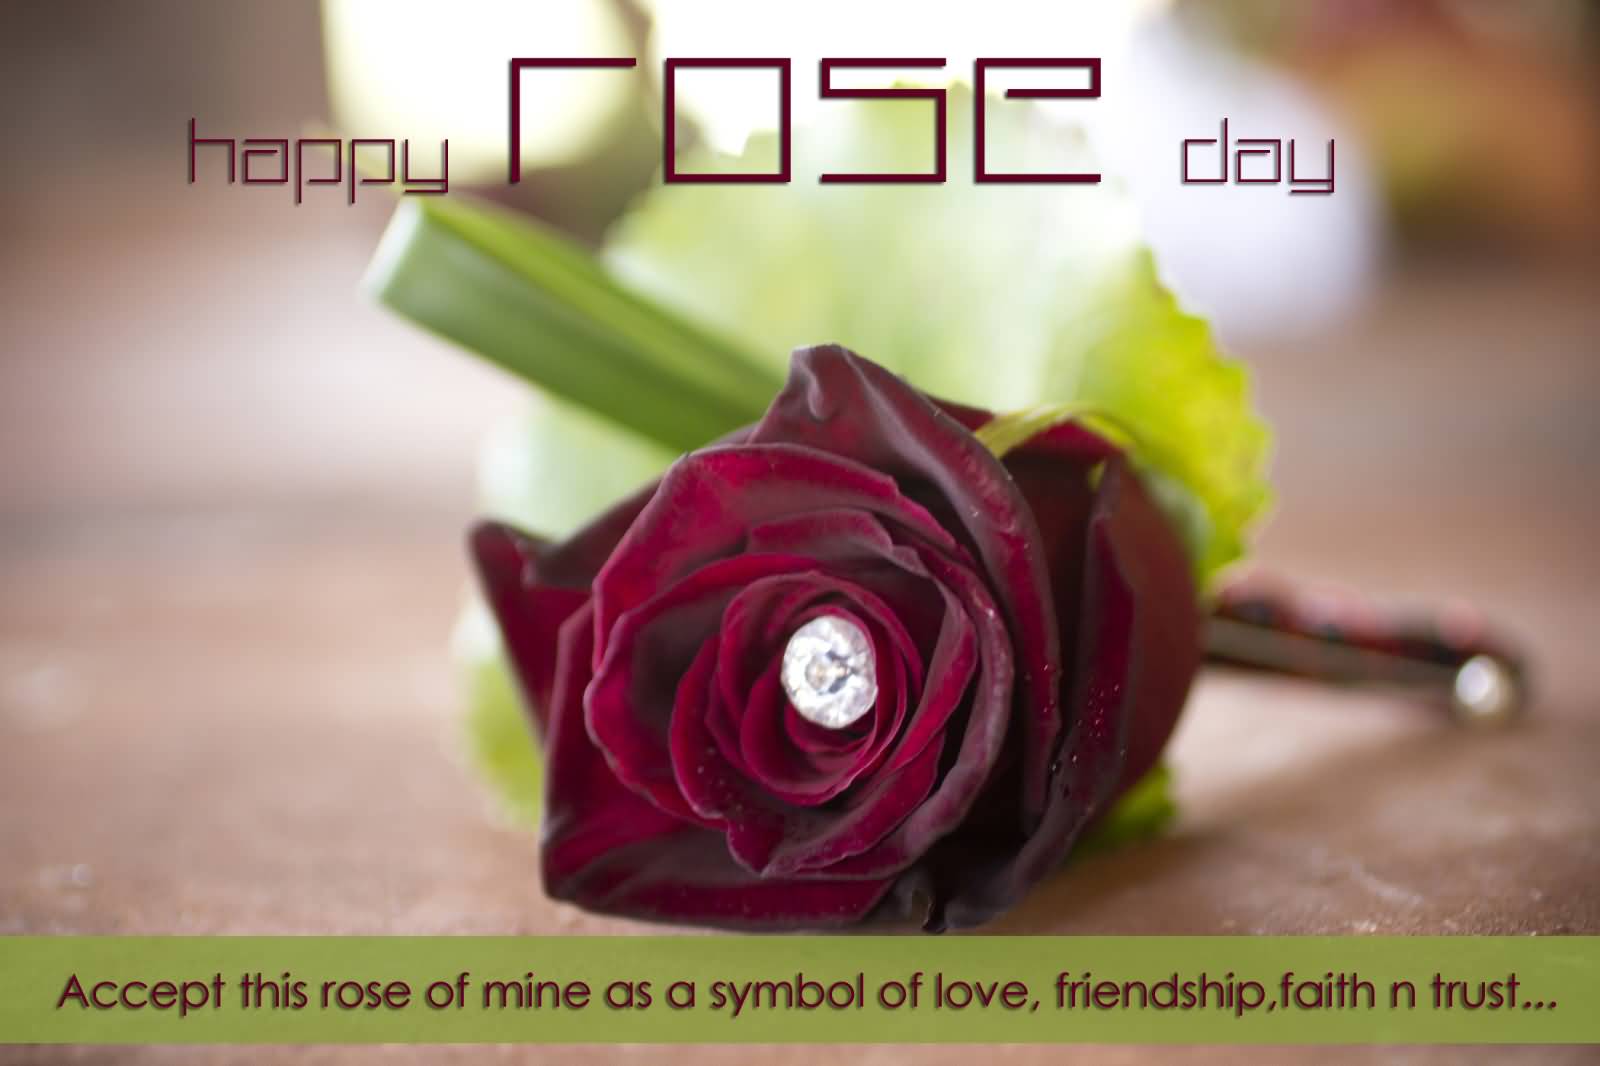 Happy Rose Day Accept This Rose Of Mine As A Symbol Of Love, Friendship, Faith n Trust